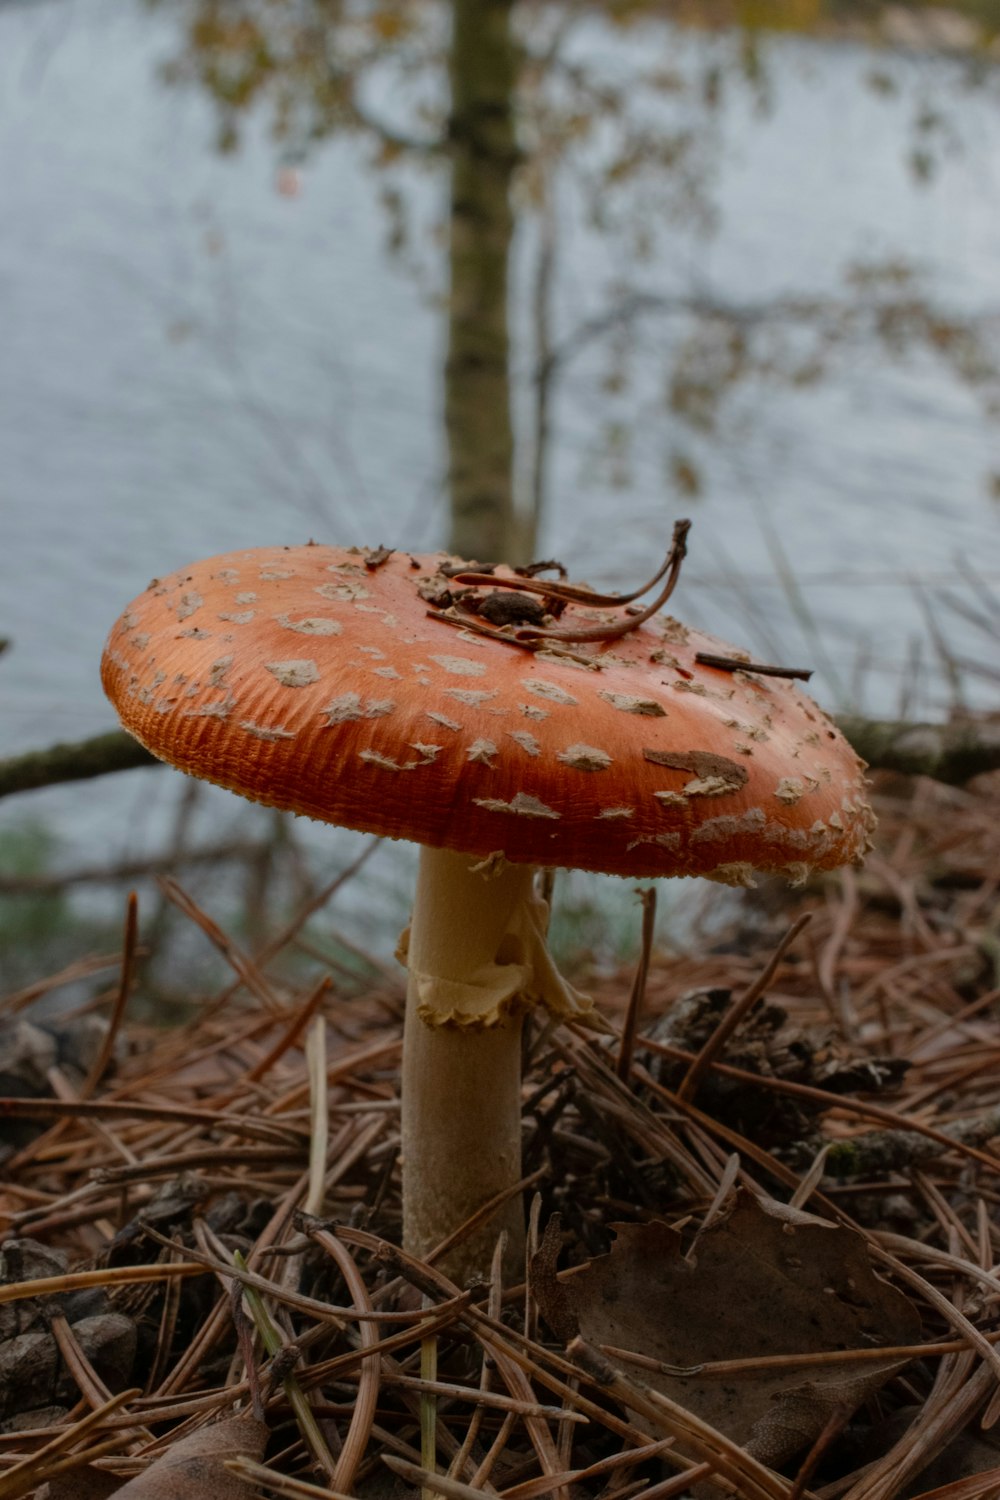 a mushroom sitting on the ground next to a body of water